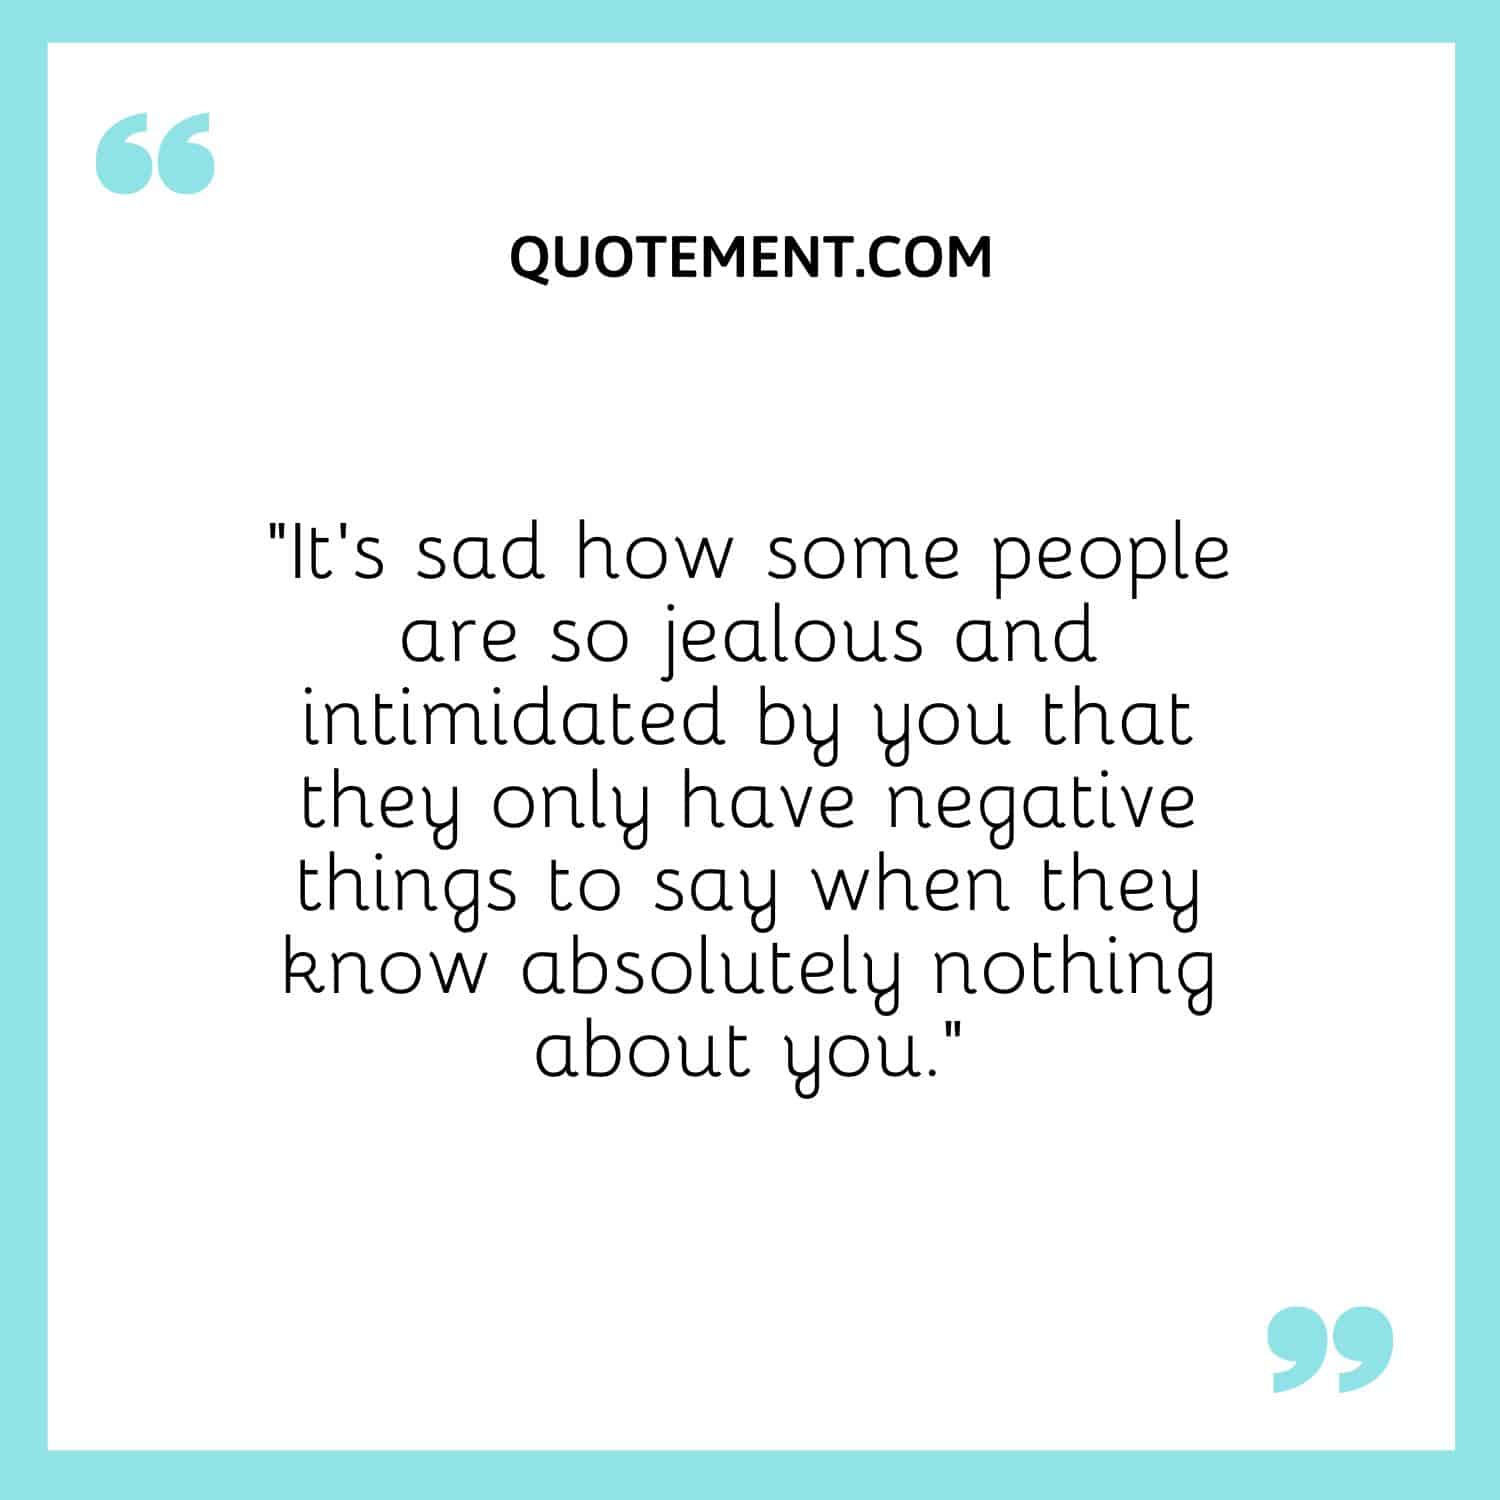 “It's sad how some people are so jealous and intimidated by you that they only have negative things to say when they know absolutely nothing about you.”